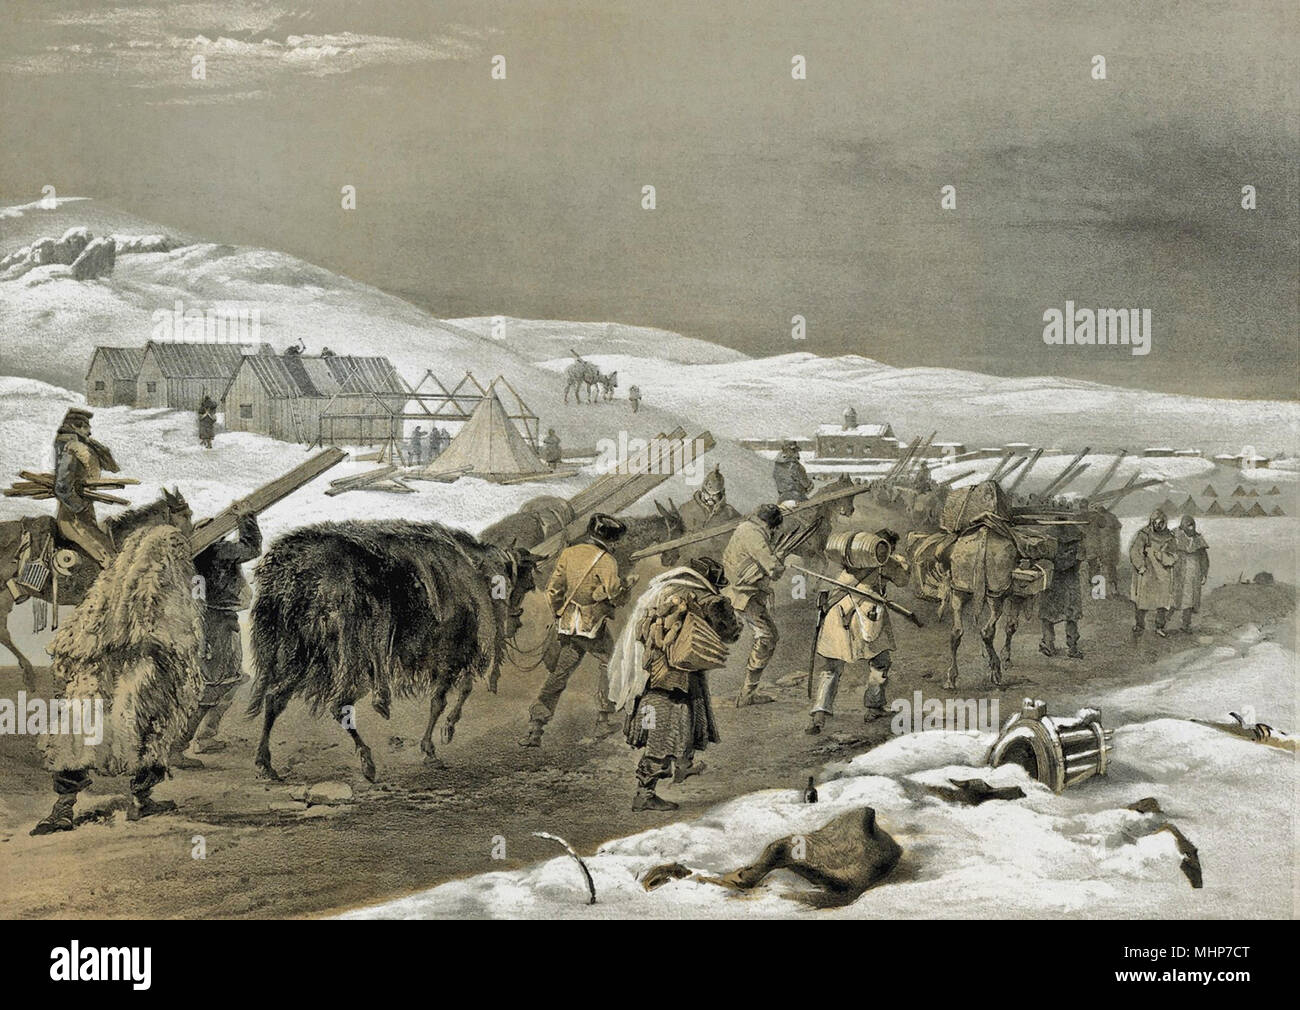 Simpson William - Crimean War - Huts and Warm Clothing for the Army Stock Photo